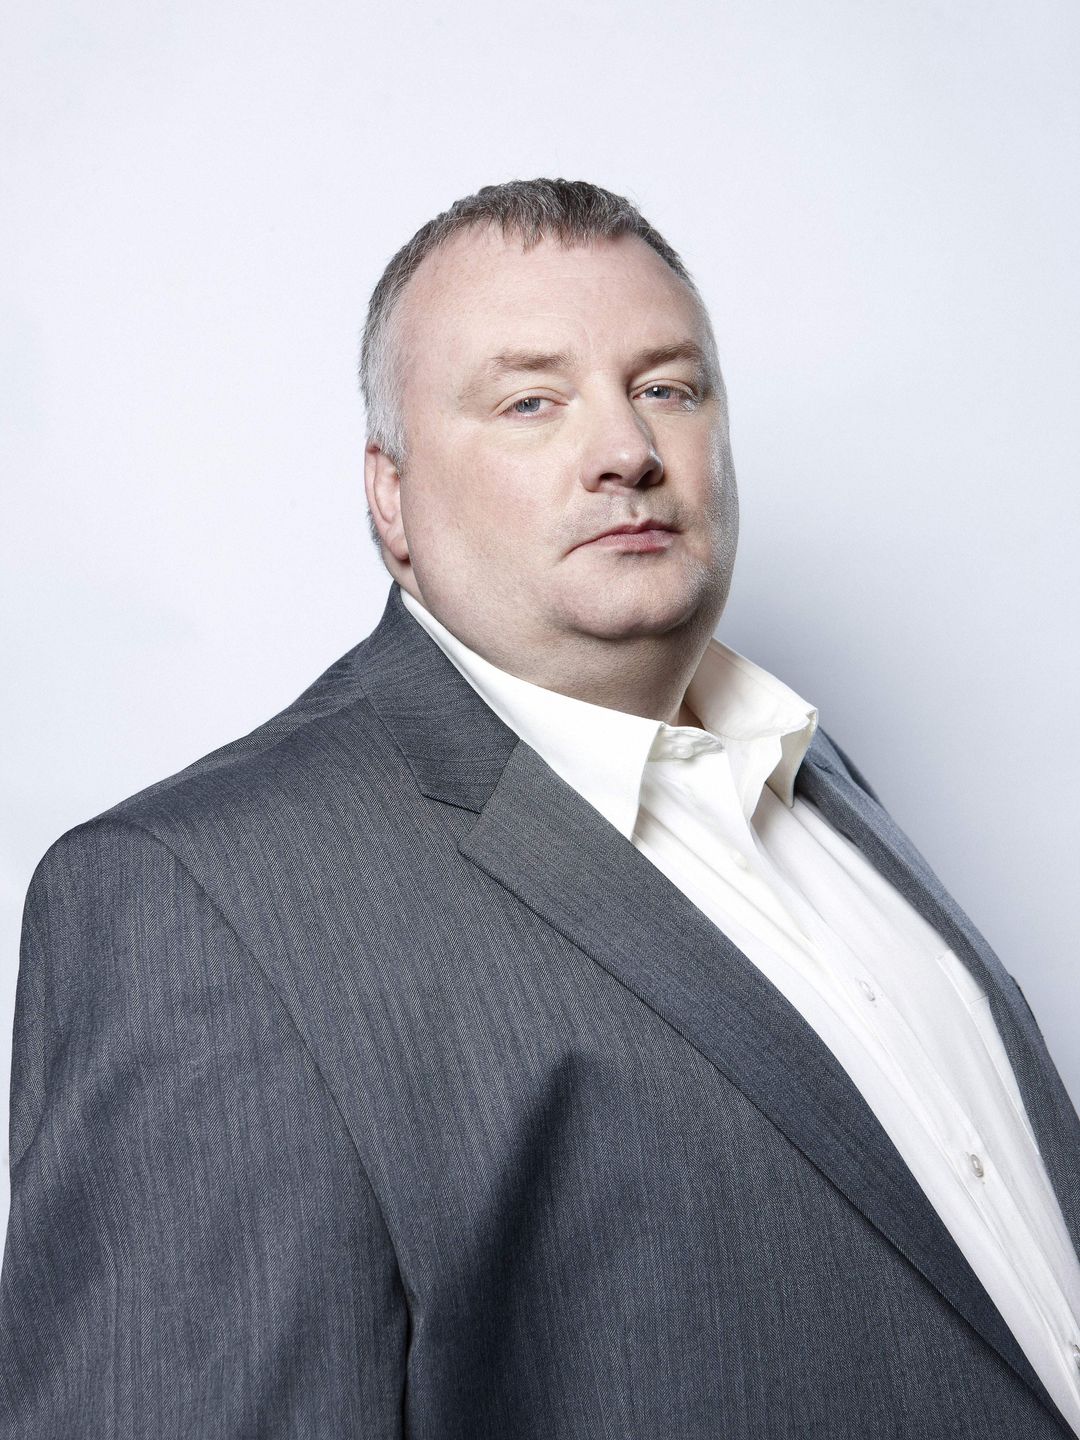 Stephen Nolan in a gray suit. 